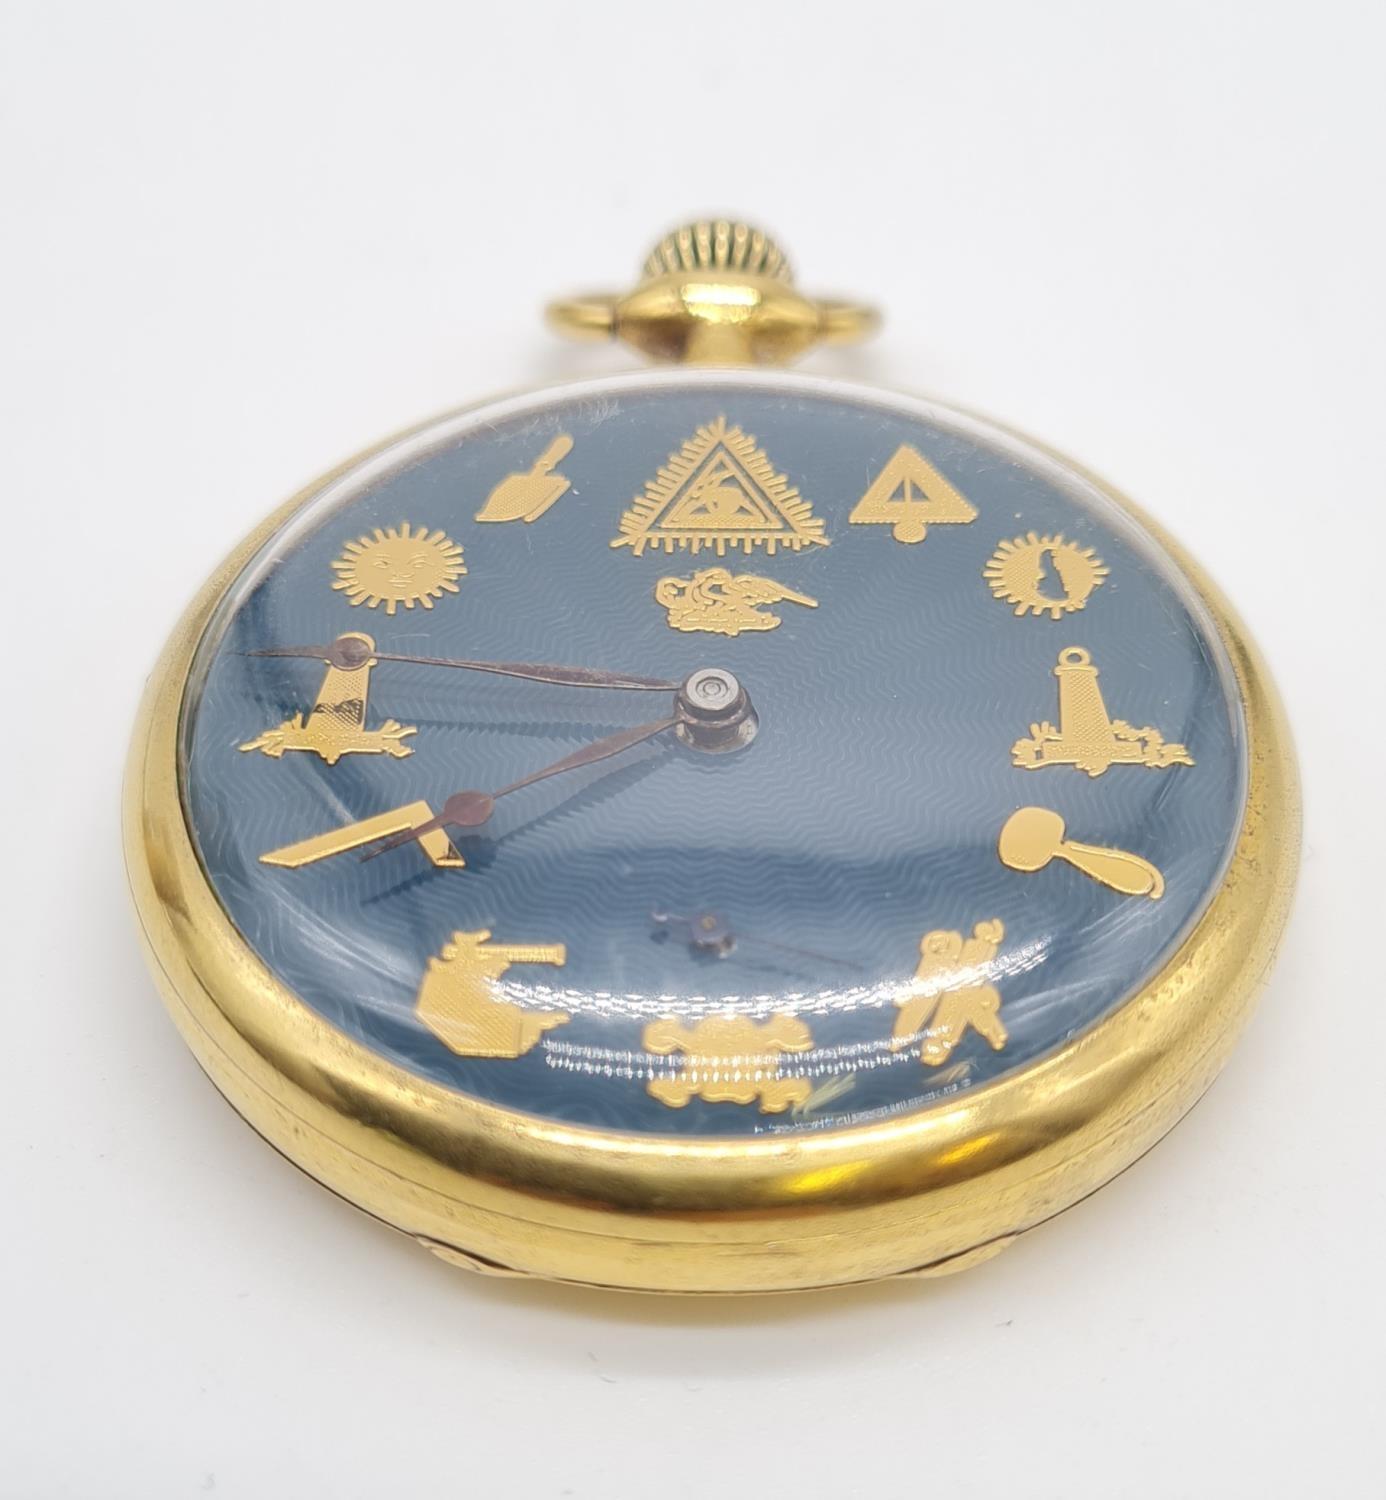 Omega Masonic Pocket Watch with rare Blue face, full working order - Image 3 of 7